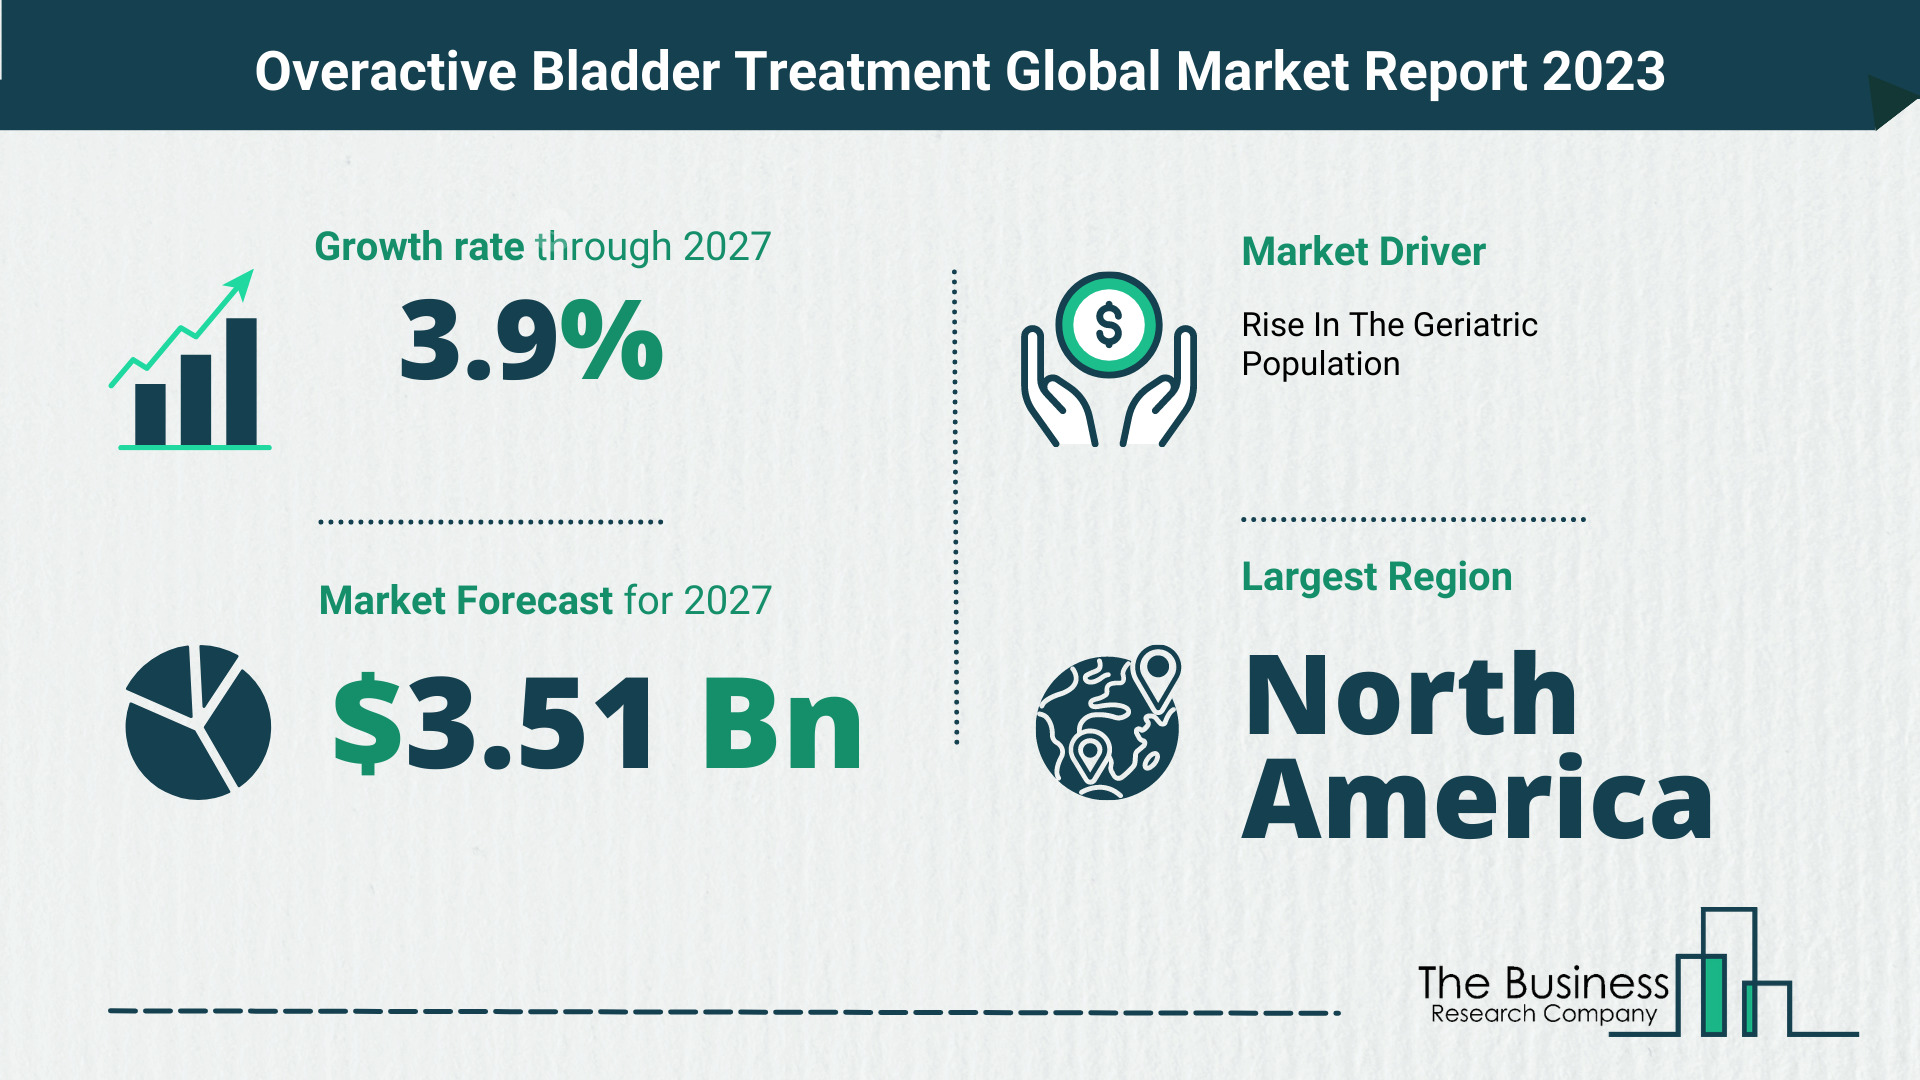 What Will The Overactive Bladder Treatment Market Look Like In 2023?